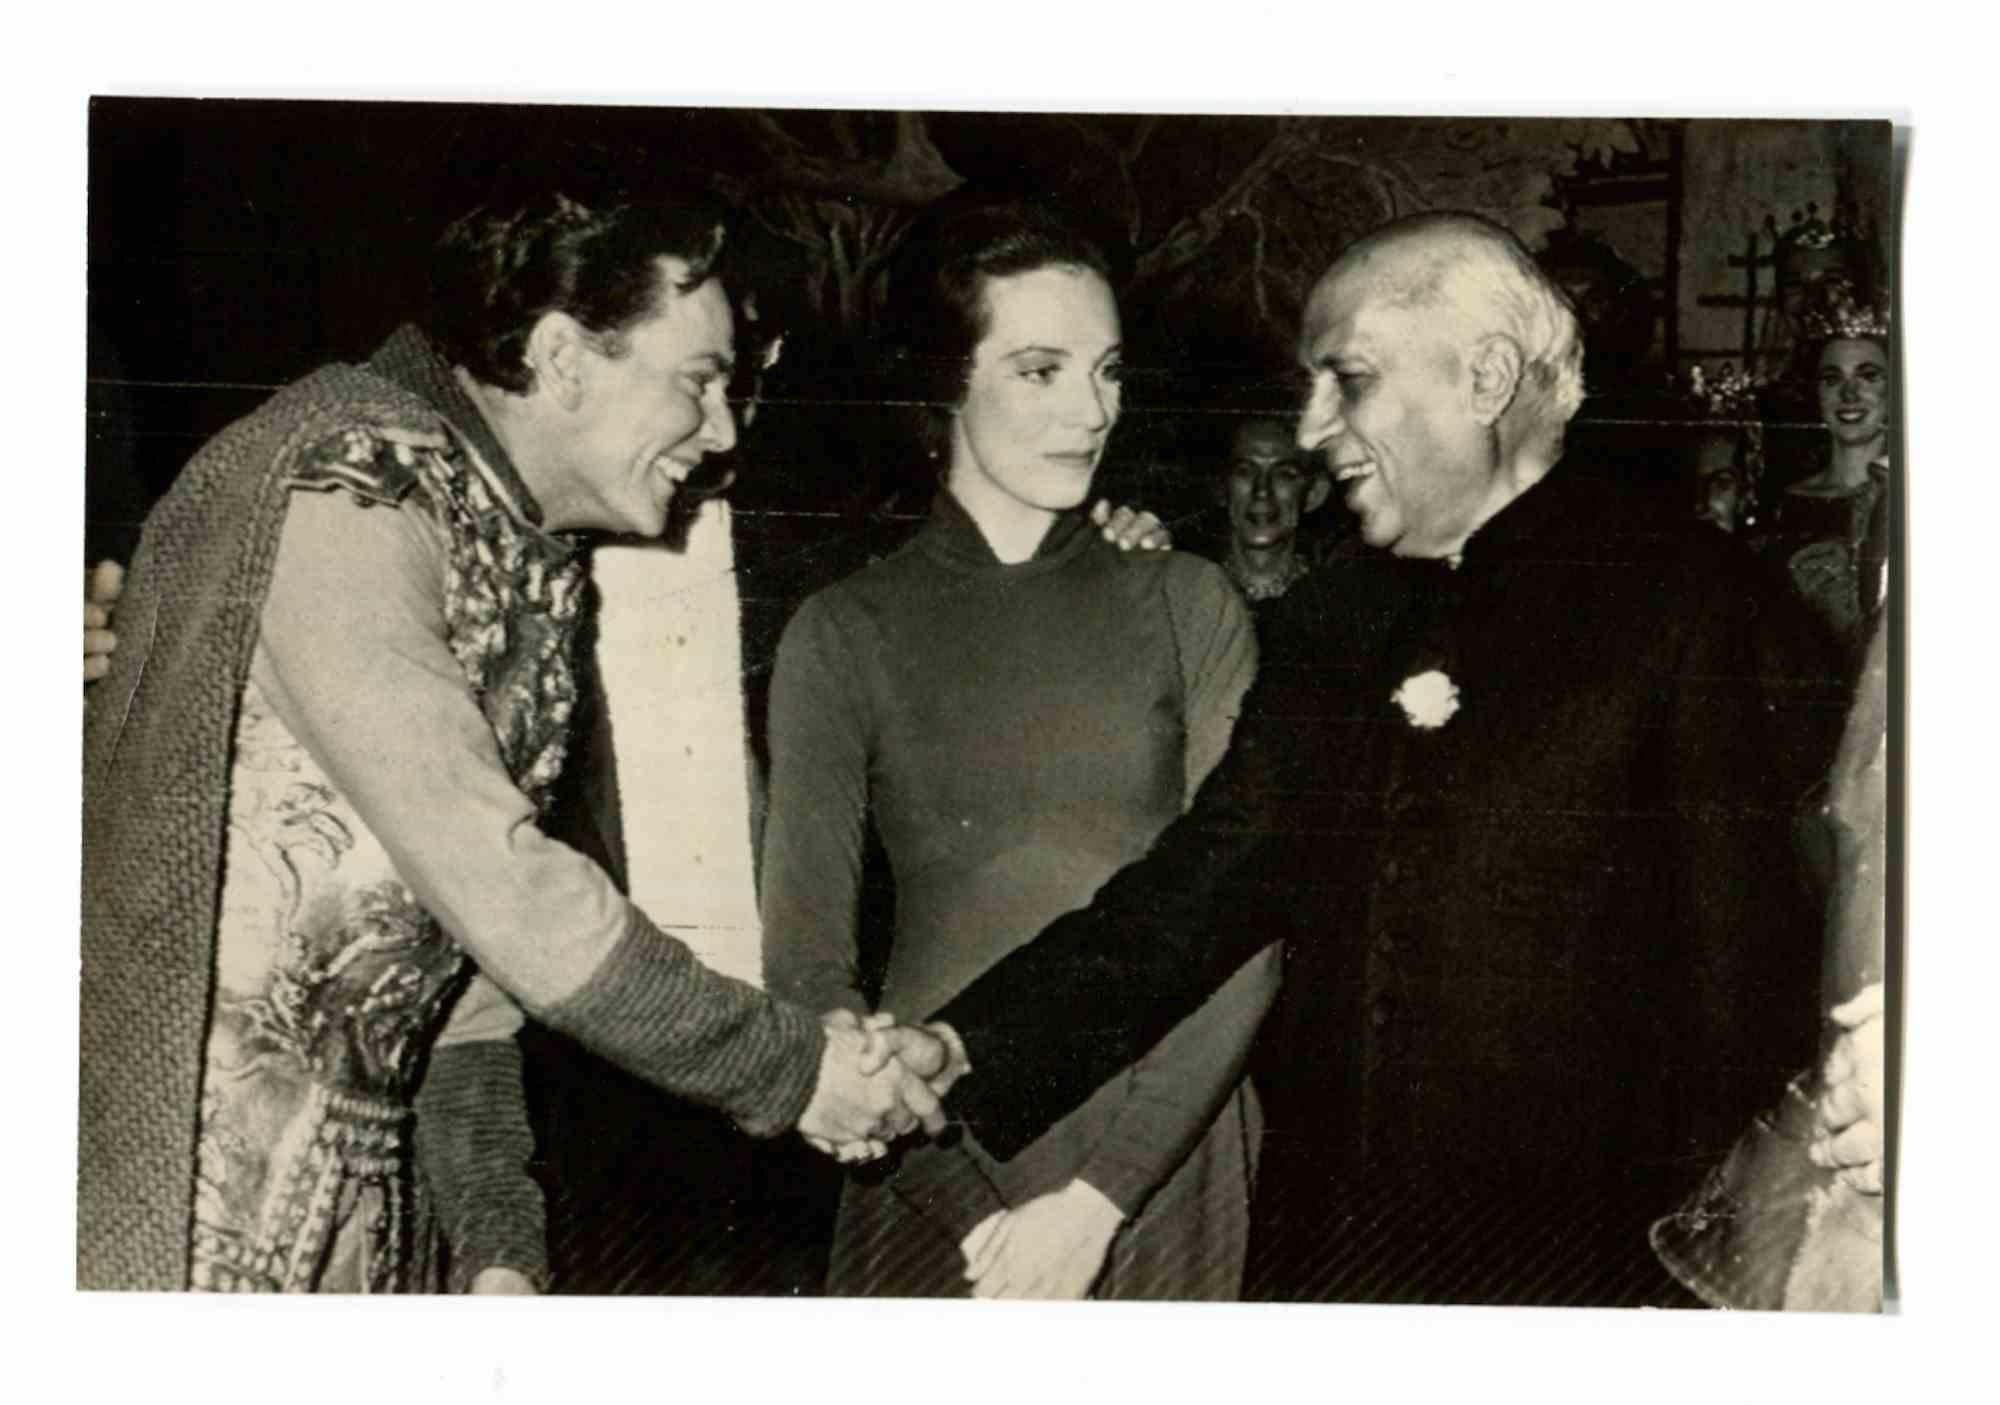 Unknown Figurative Photograph - Jawaharlal Nehru and Julie Andrews - Vintage Photo - 1960s